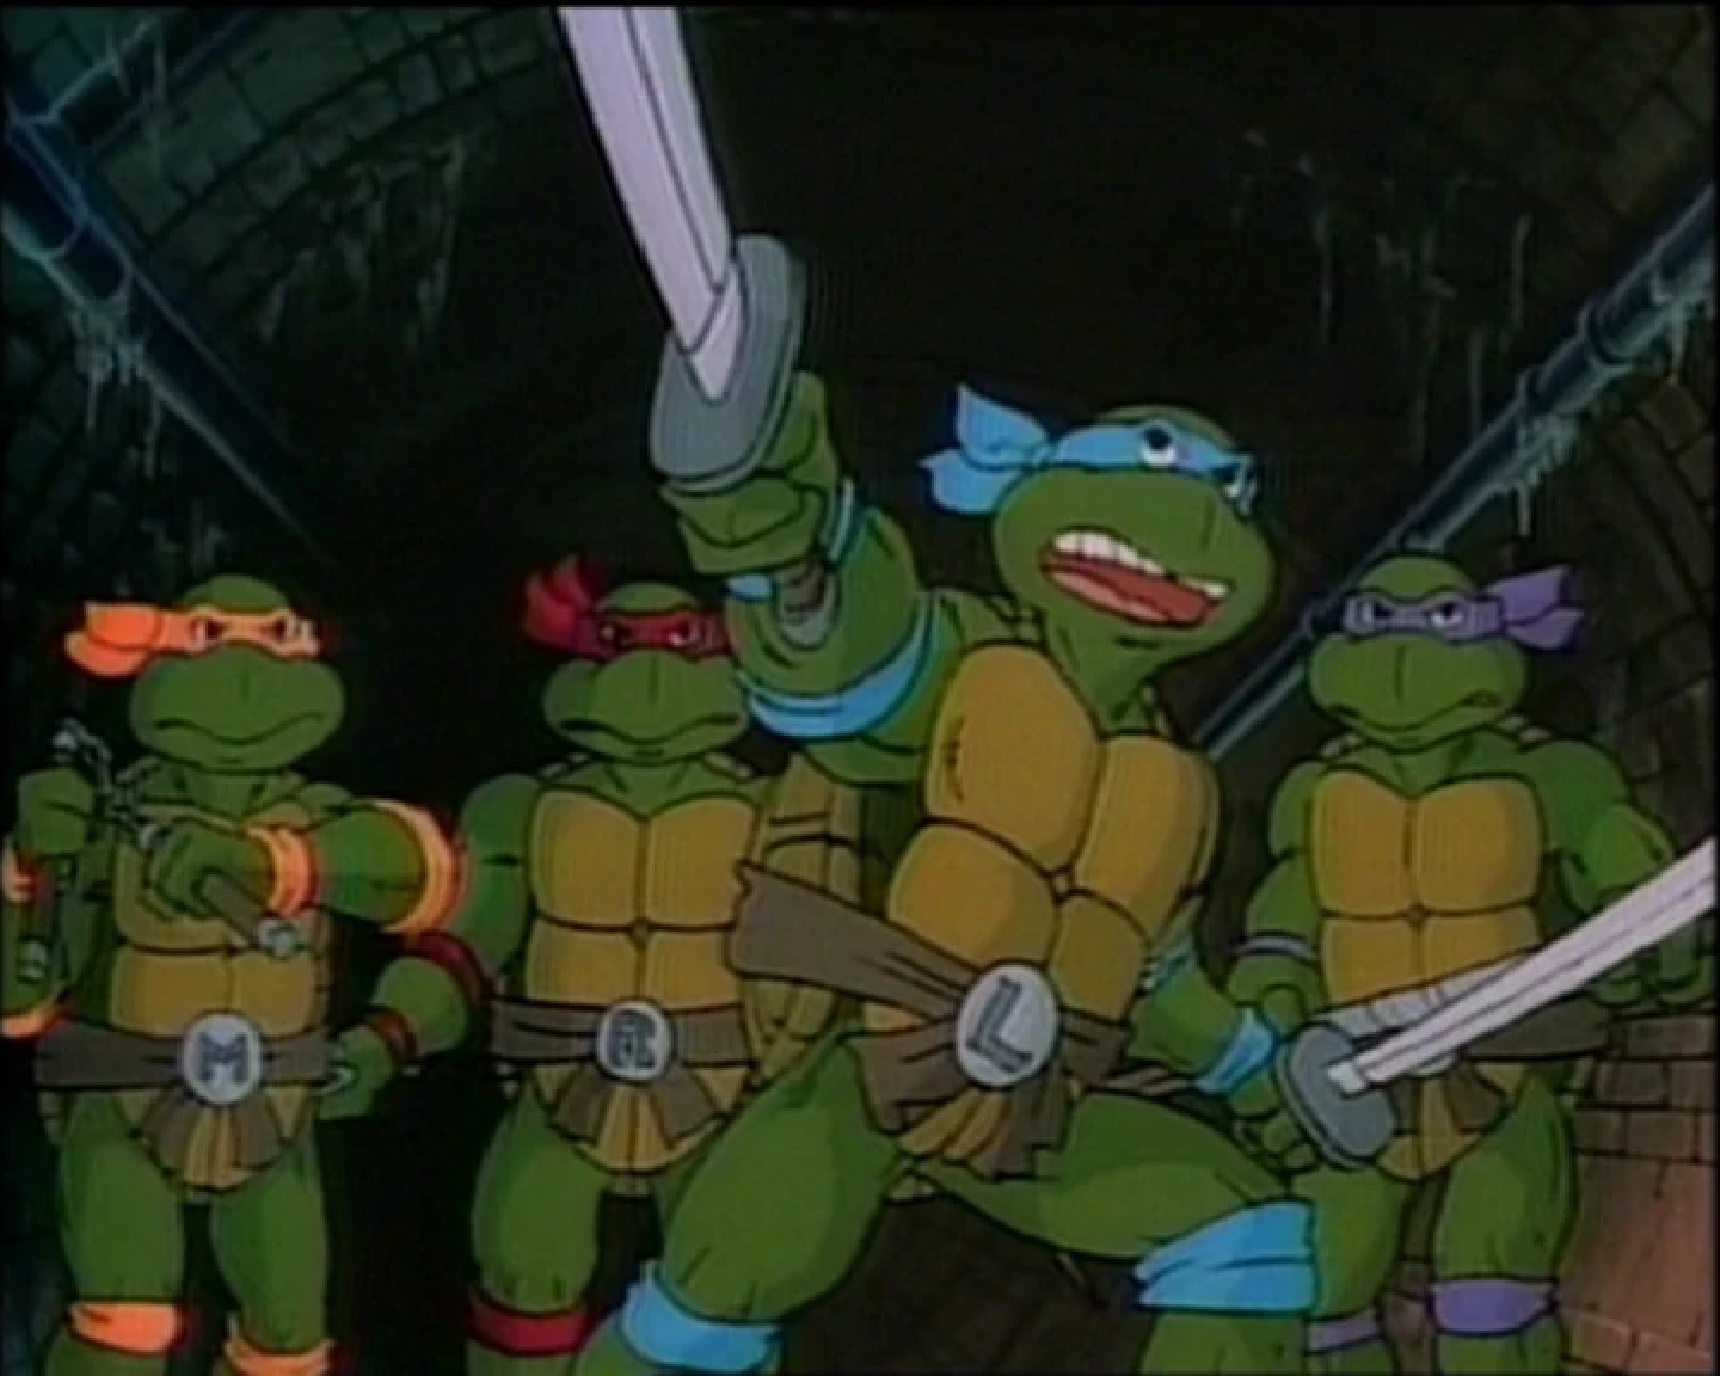 2 things I used to love as a kid were the Kings and TMNT. I went